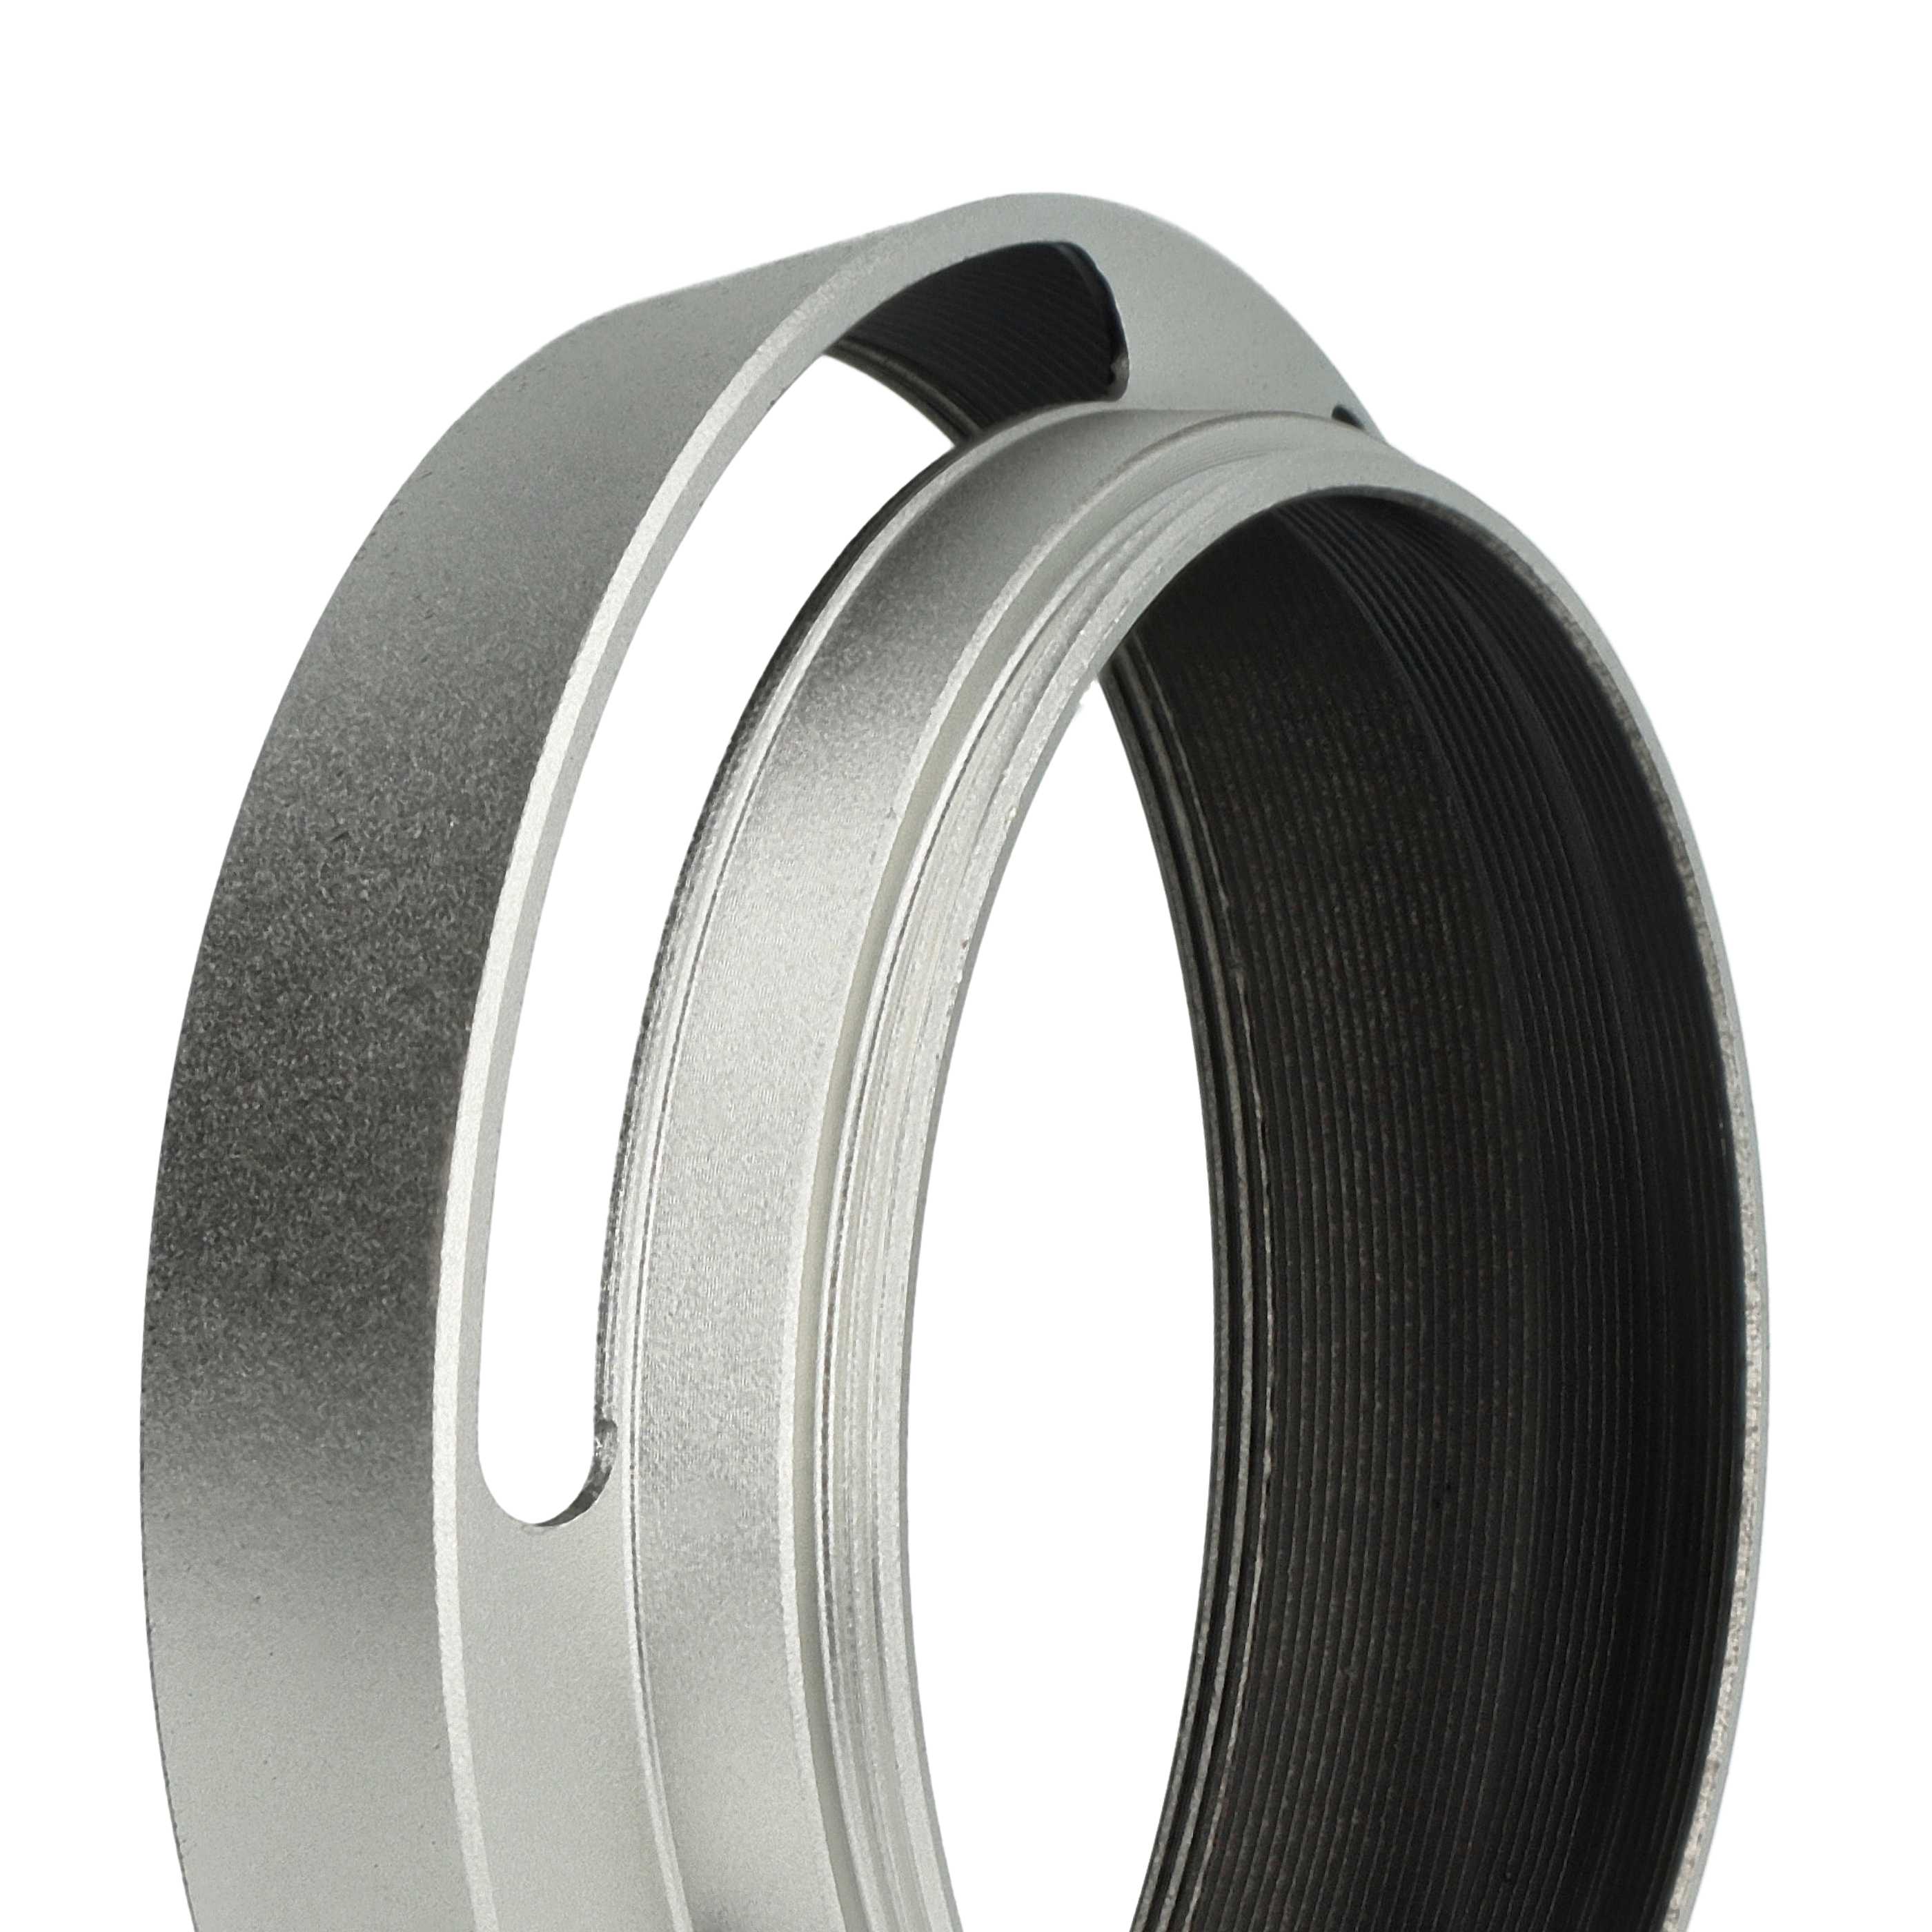 Lens Hood suitable for 55mm Lens - Lens Shade Silver, Round